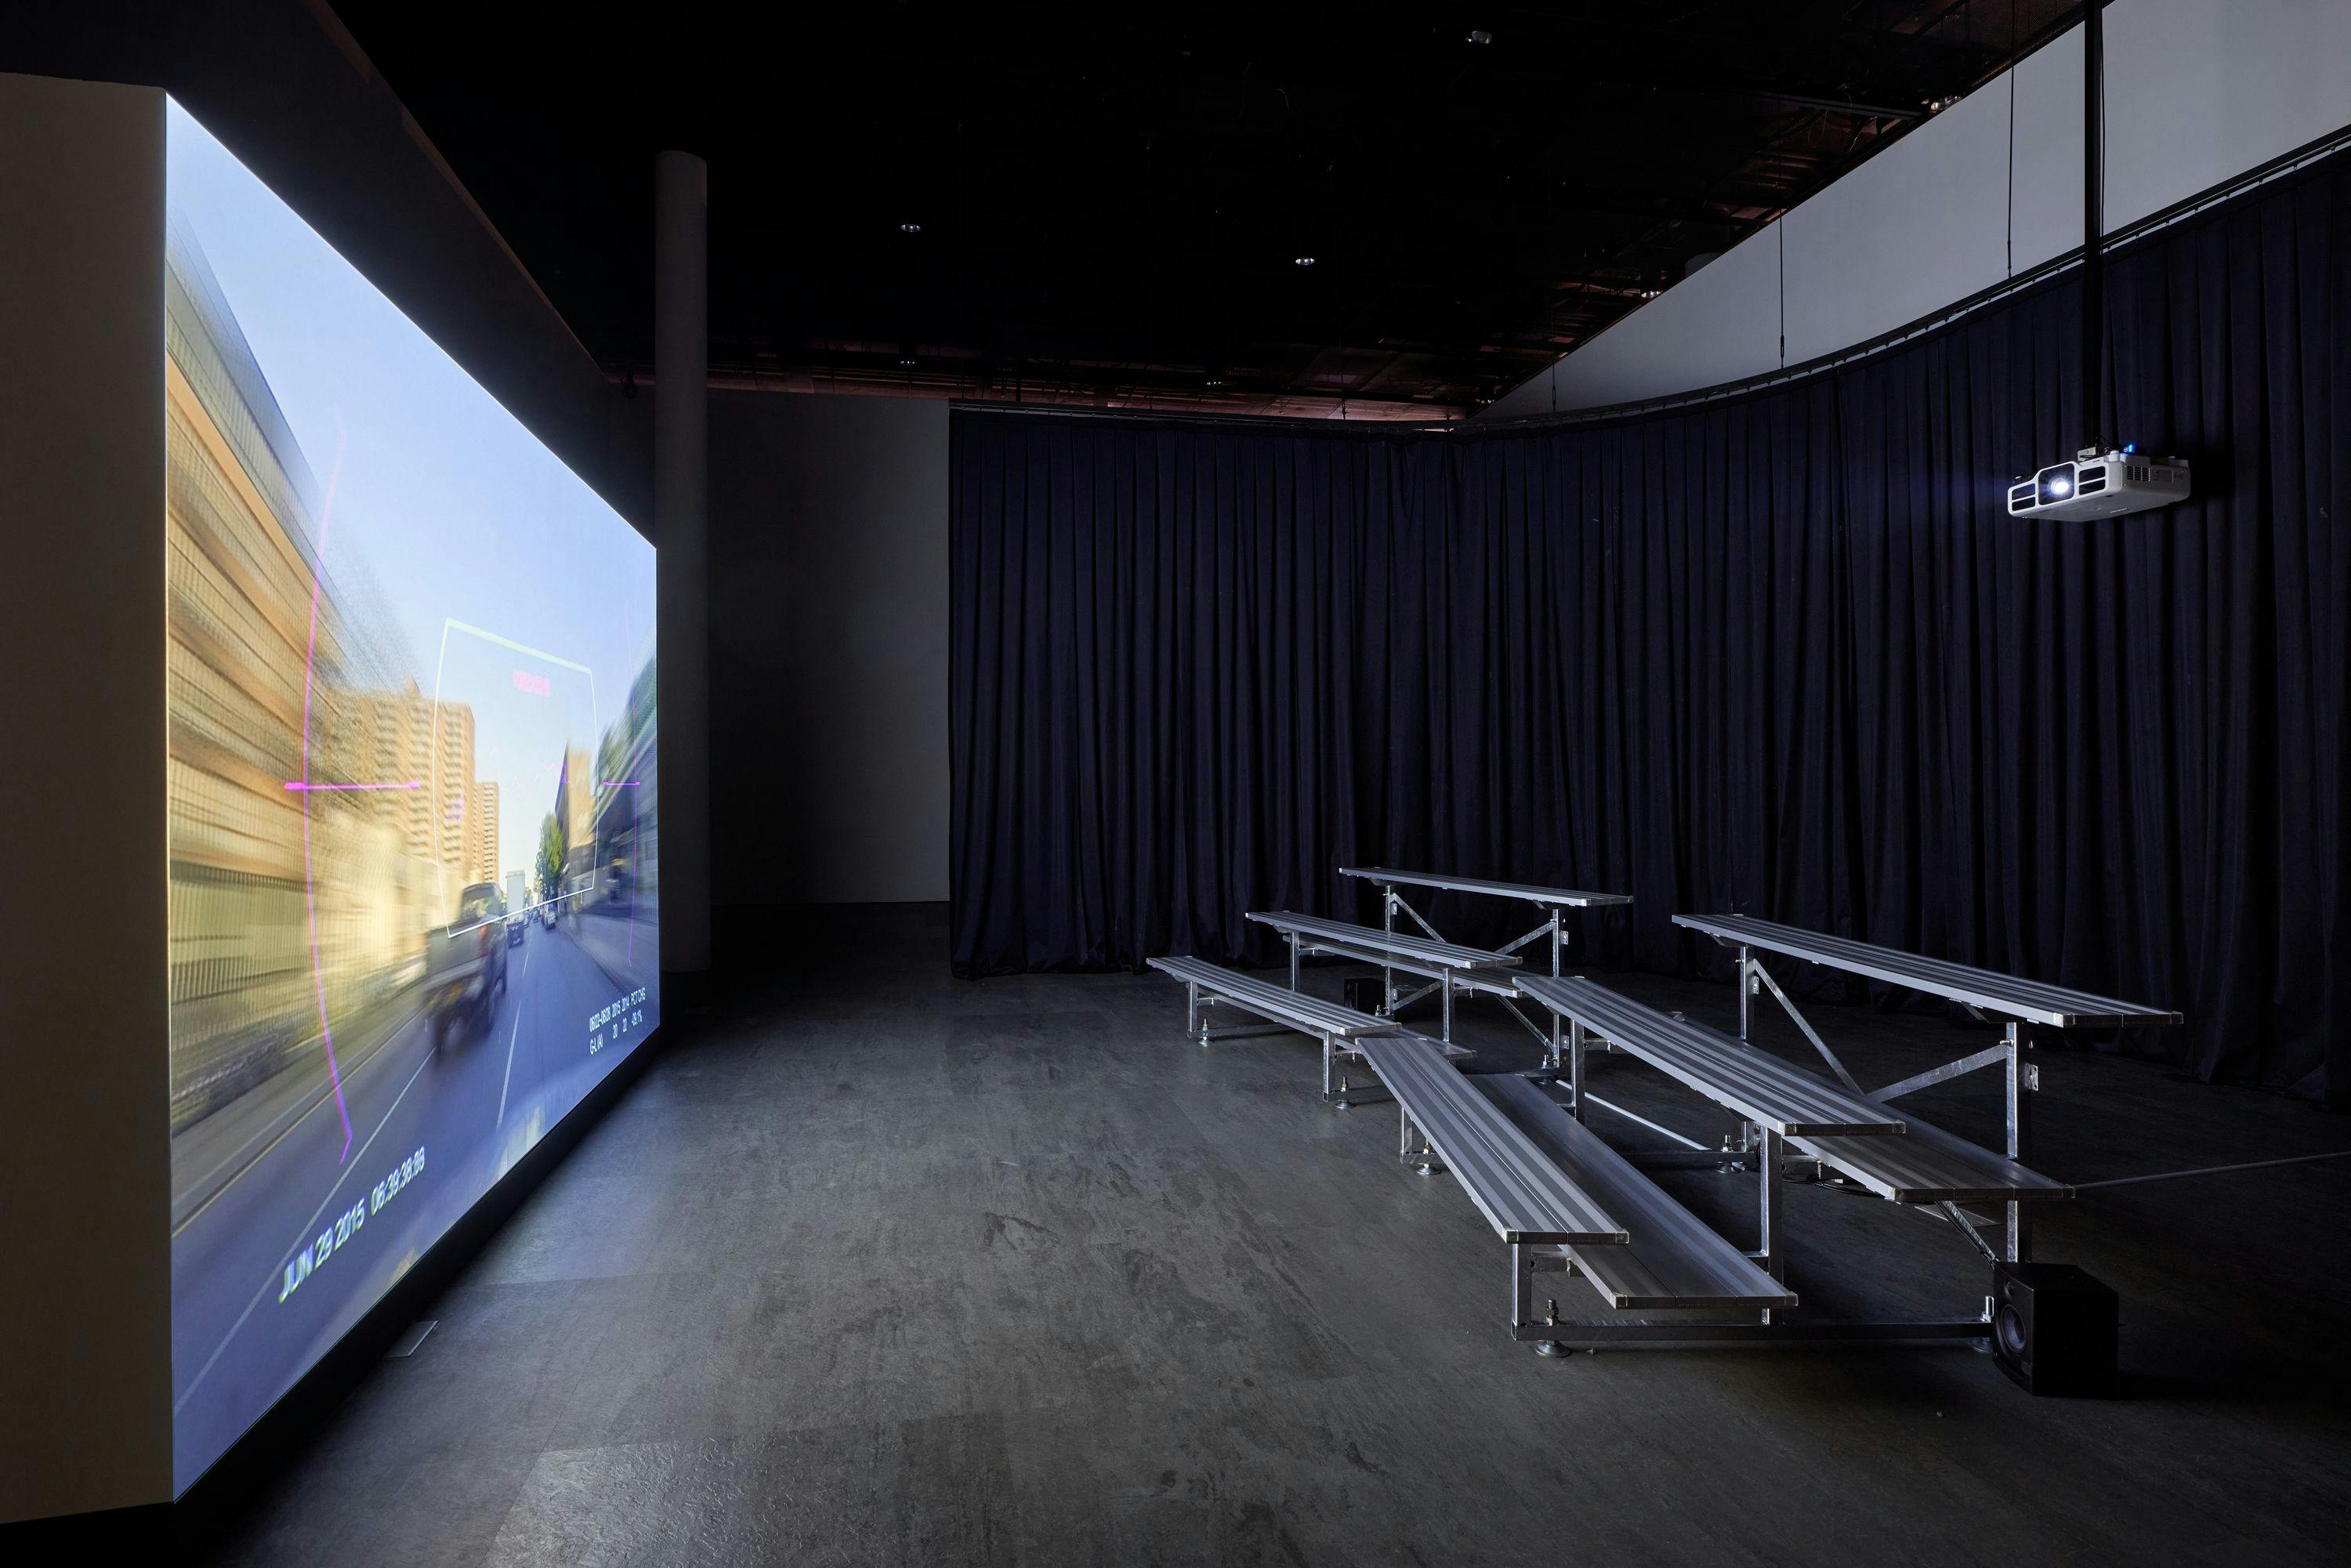 A dark, curtained room showcases a large projection on one wall and a set of bleachers facing it. The projection depicts dashcam footage, capturing cars driving ahead and buildings speeding by.